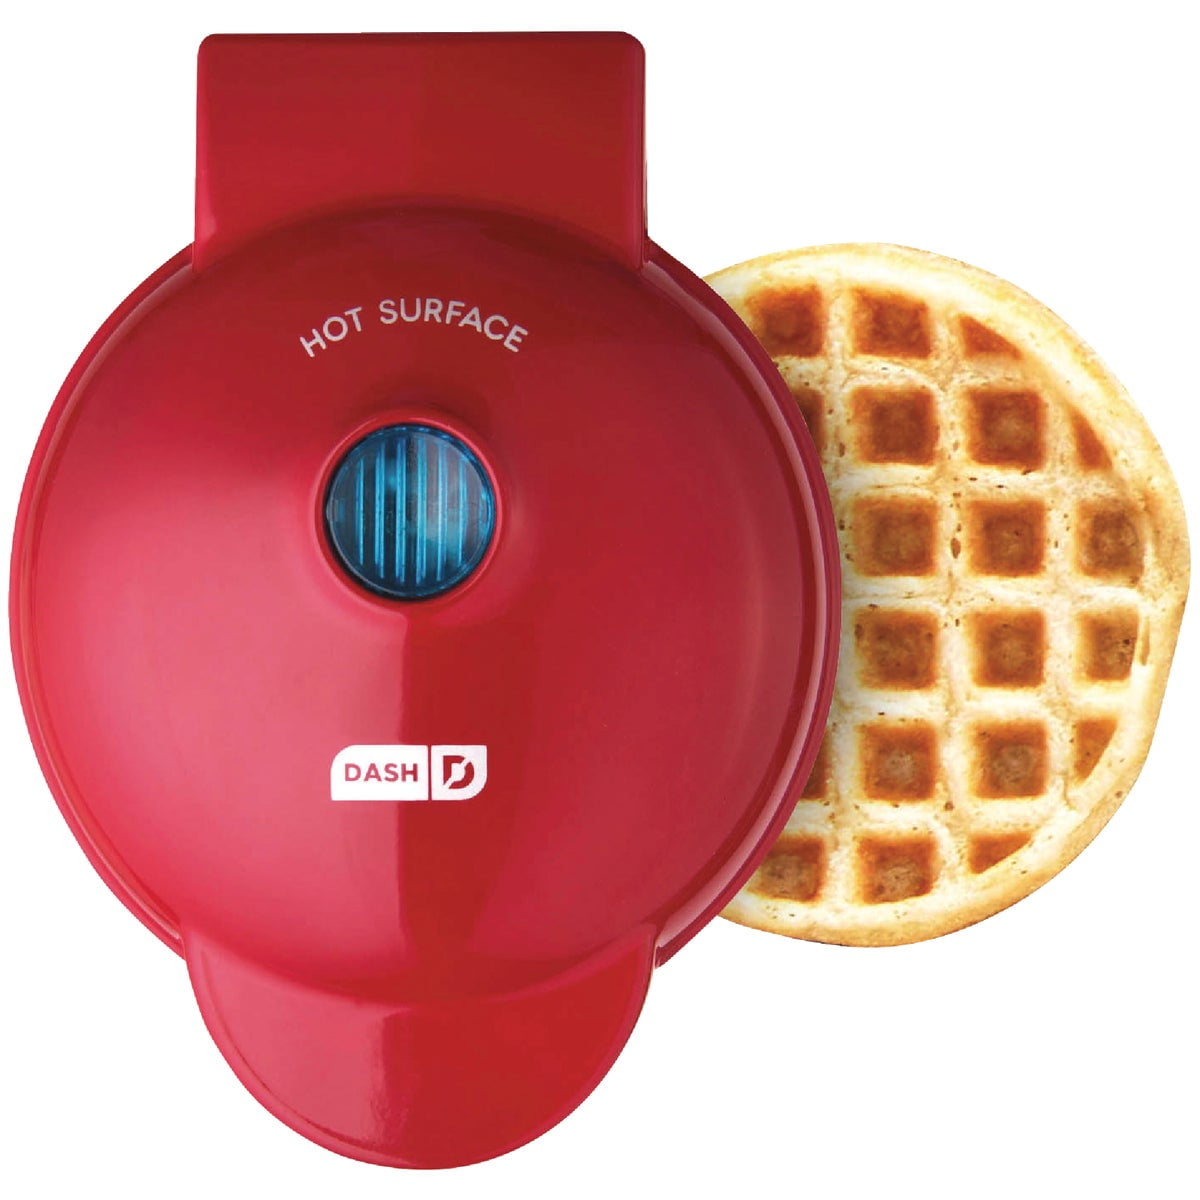  Mini Waffle Maker with Removable Plates, 2 in 1 Cars and Trucks Waffle  Maker for Kids Make 8 Fun Different Car Waffle in Minutes Waffle Irons  Non-stick Pancakes Maker Machine Unique